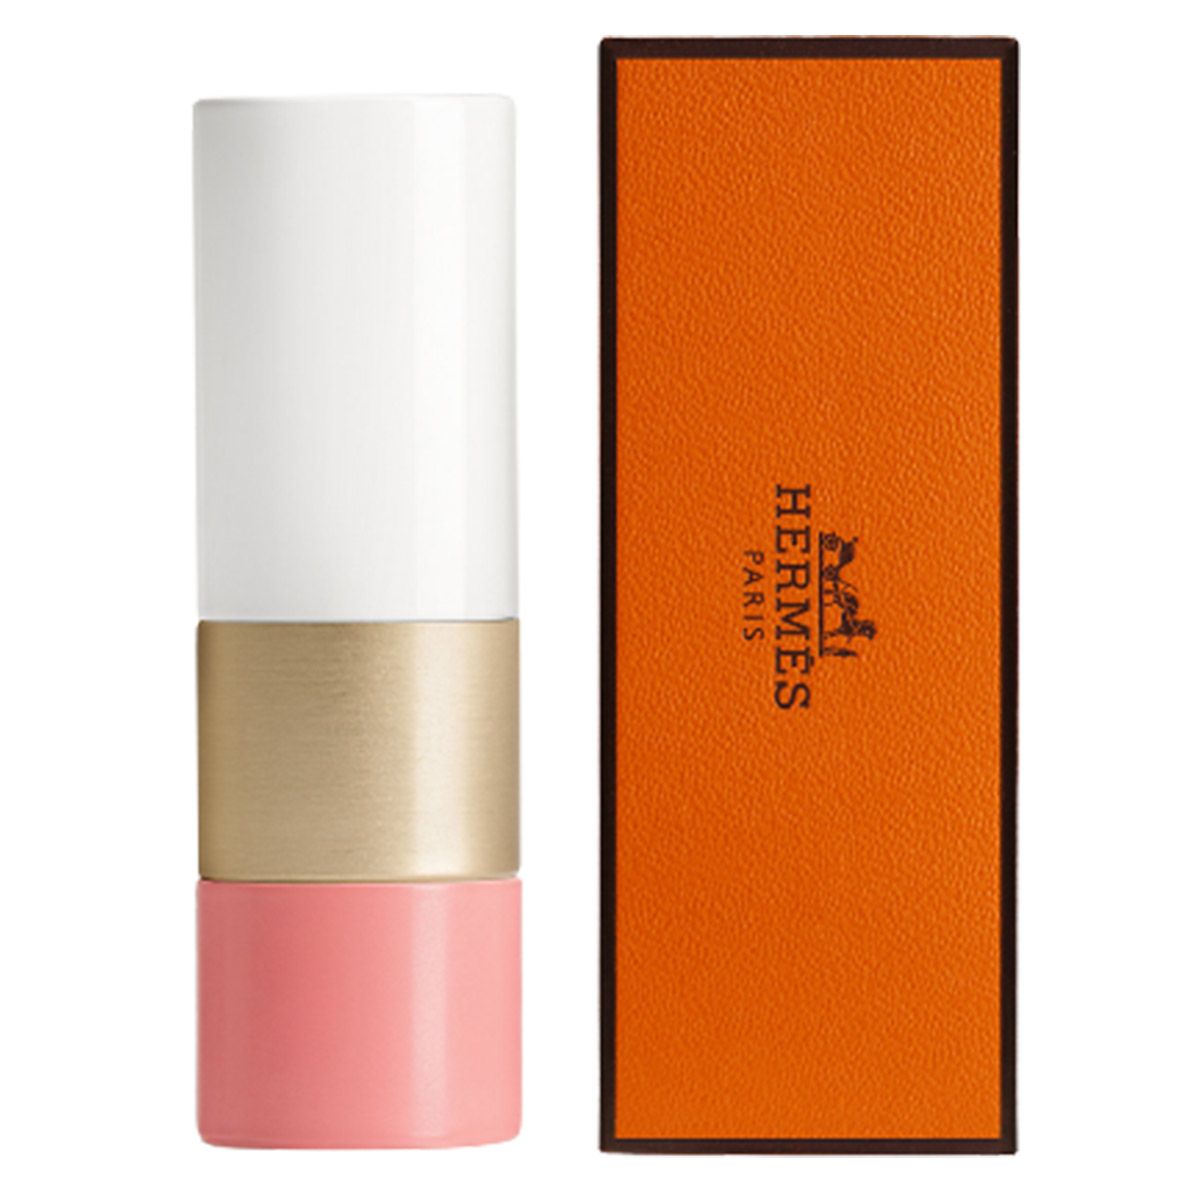  Son dưỡng Hermes Tinted 30 - Rose D'Ete Limited Edition Spring 